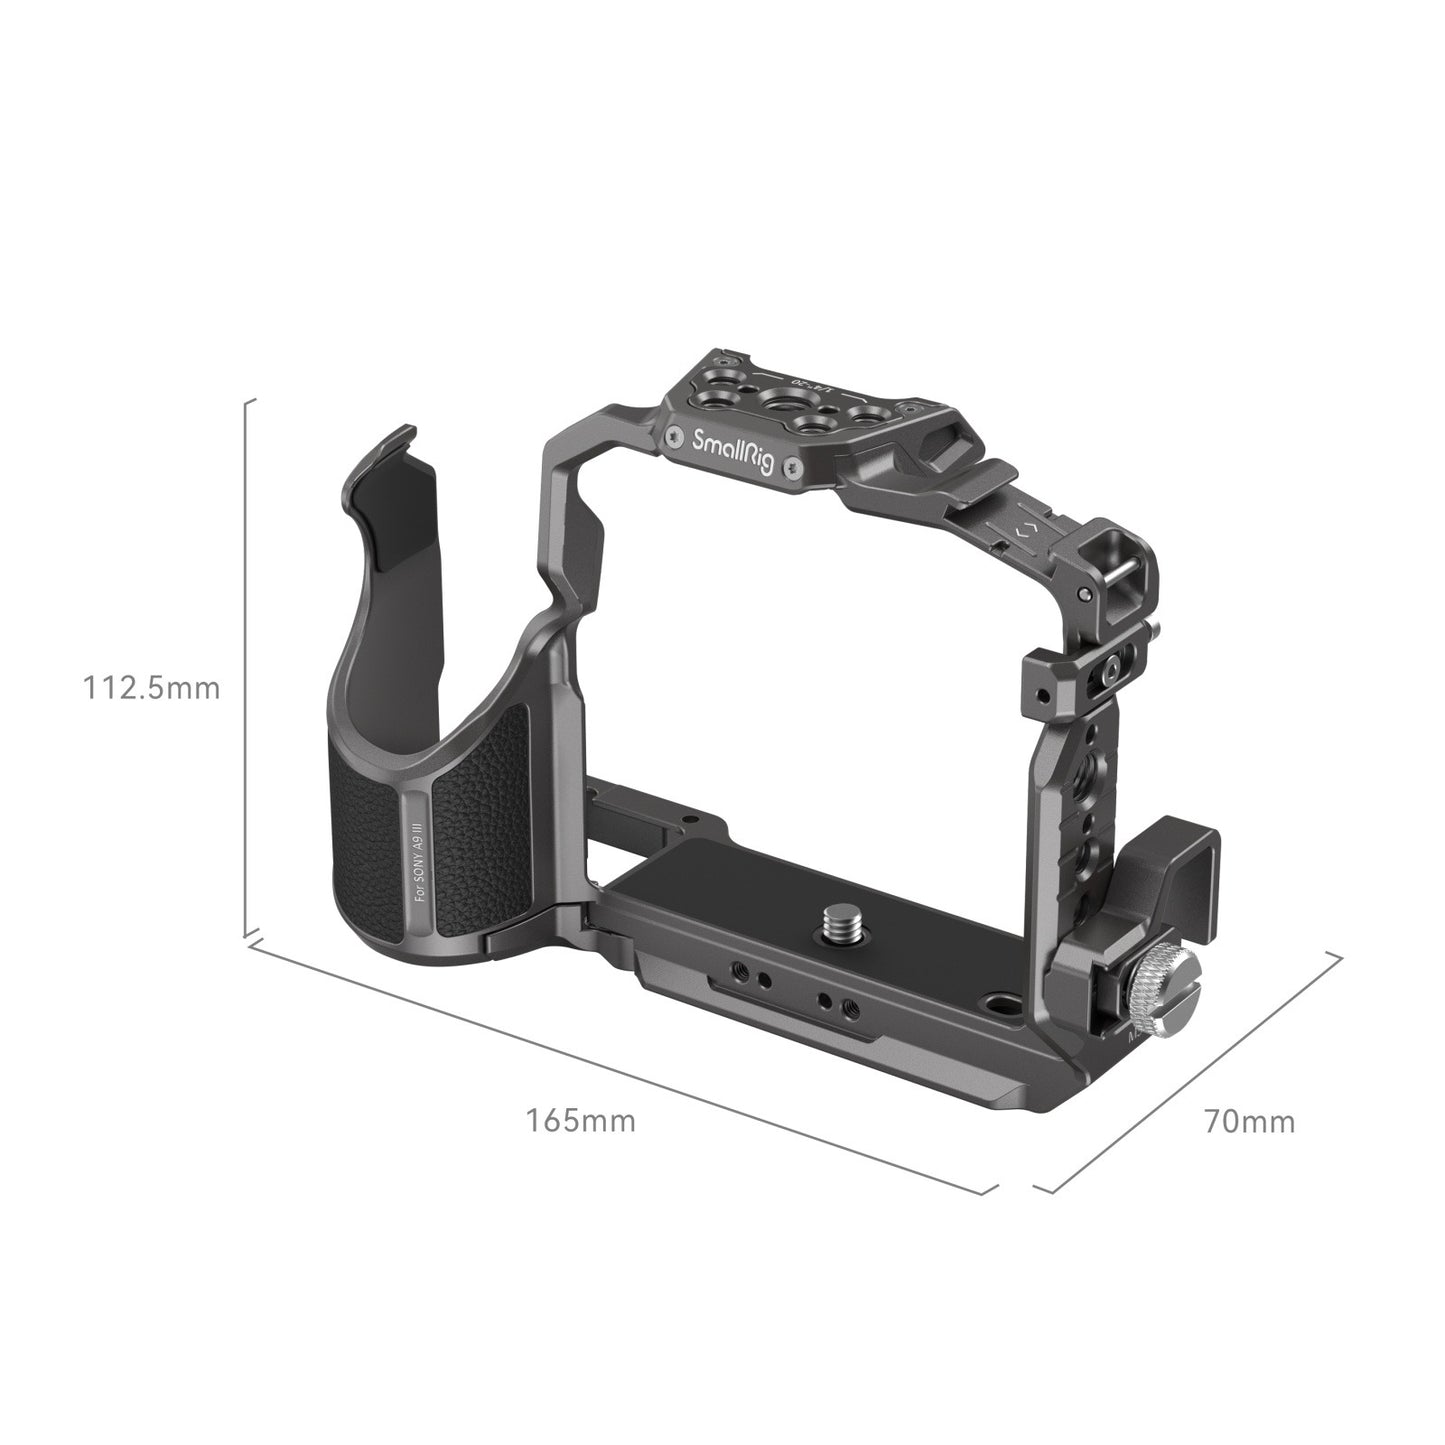 SmallRig Aluminum Formfitting Camera Cage for Sony a9 III / ILCE-9M3 Body with HDMI Cable Clamp, Arca-Swiss Quick Release Plate, NATO Rail, Cold Shoe Mount, QD Socket, 1/4"-20 Threaded & ARRI 3/8"-16 Locating Hole for Accessory Attachments